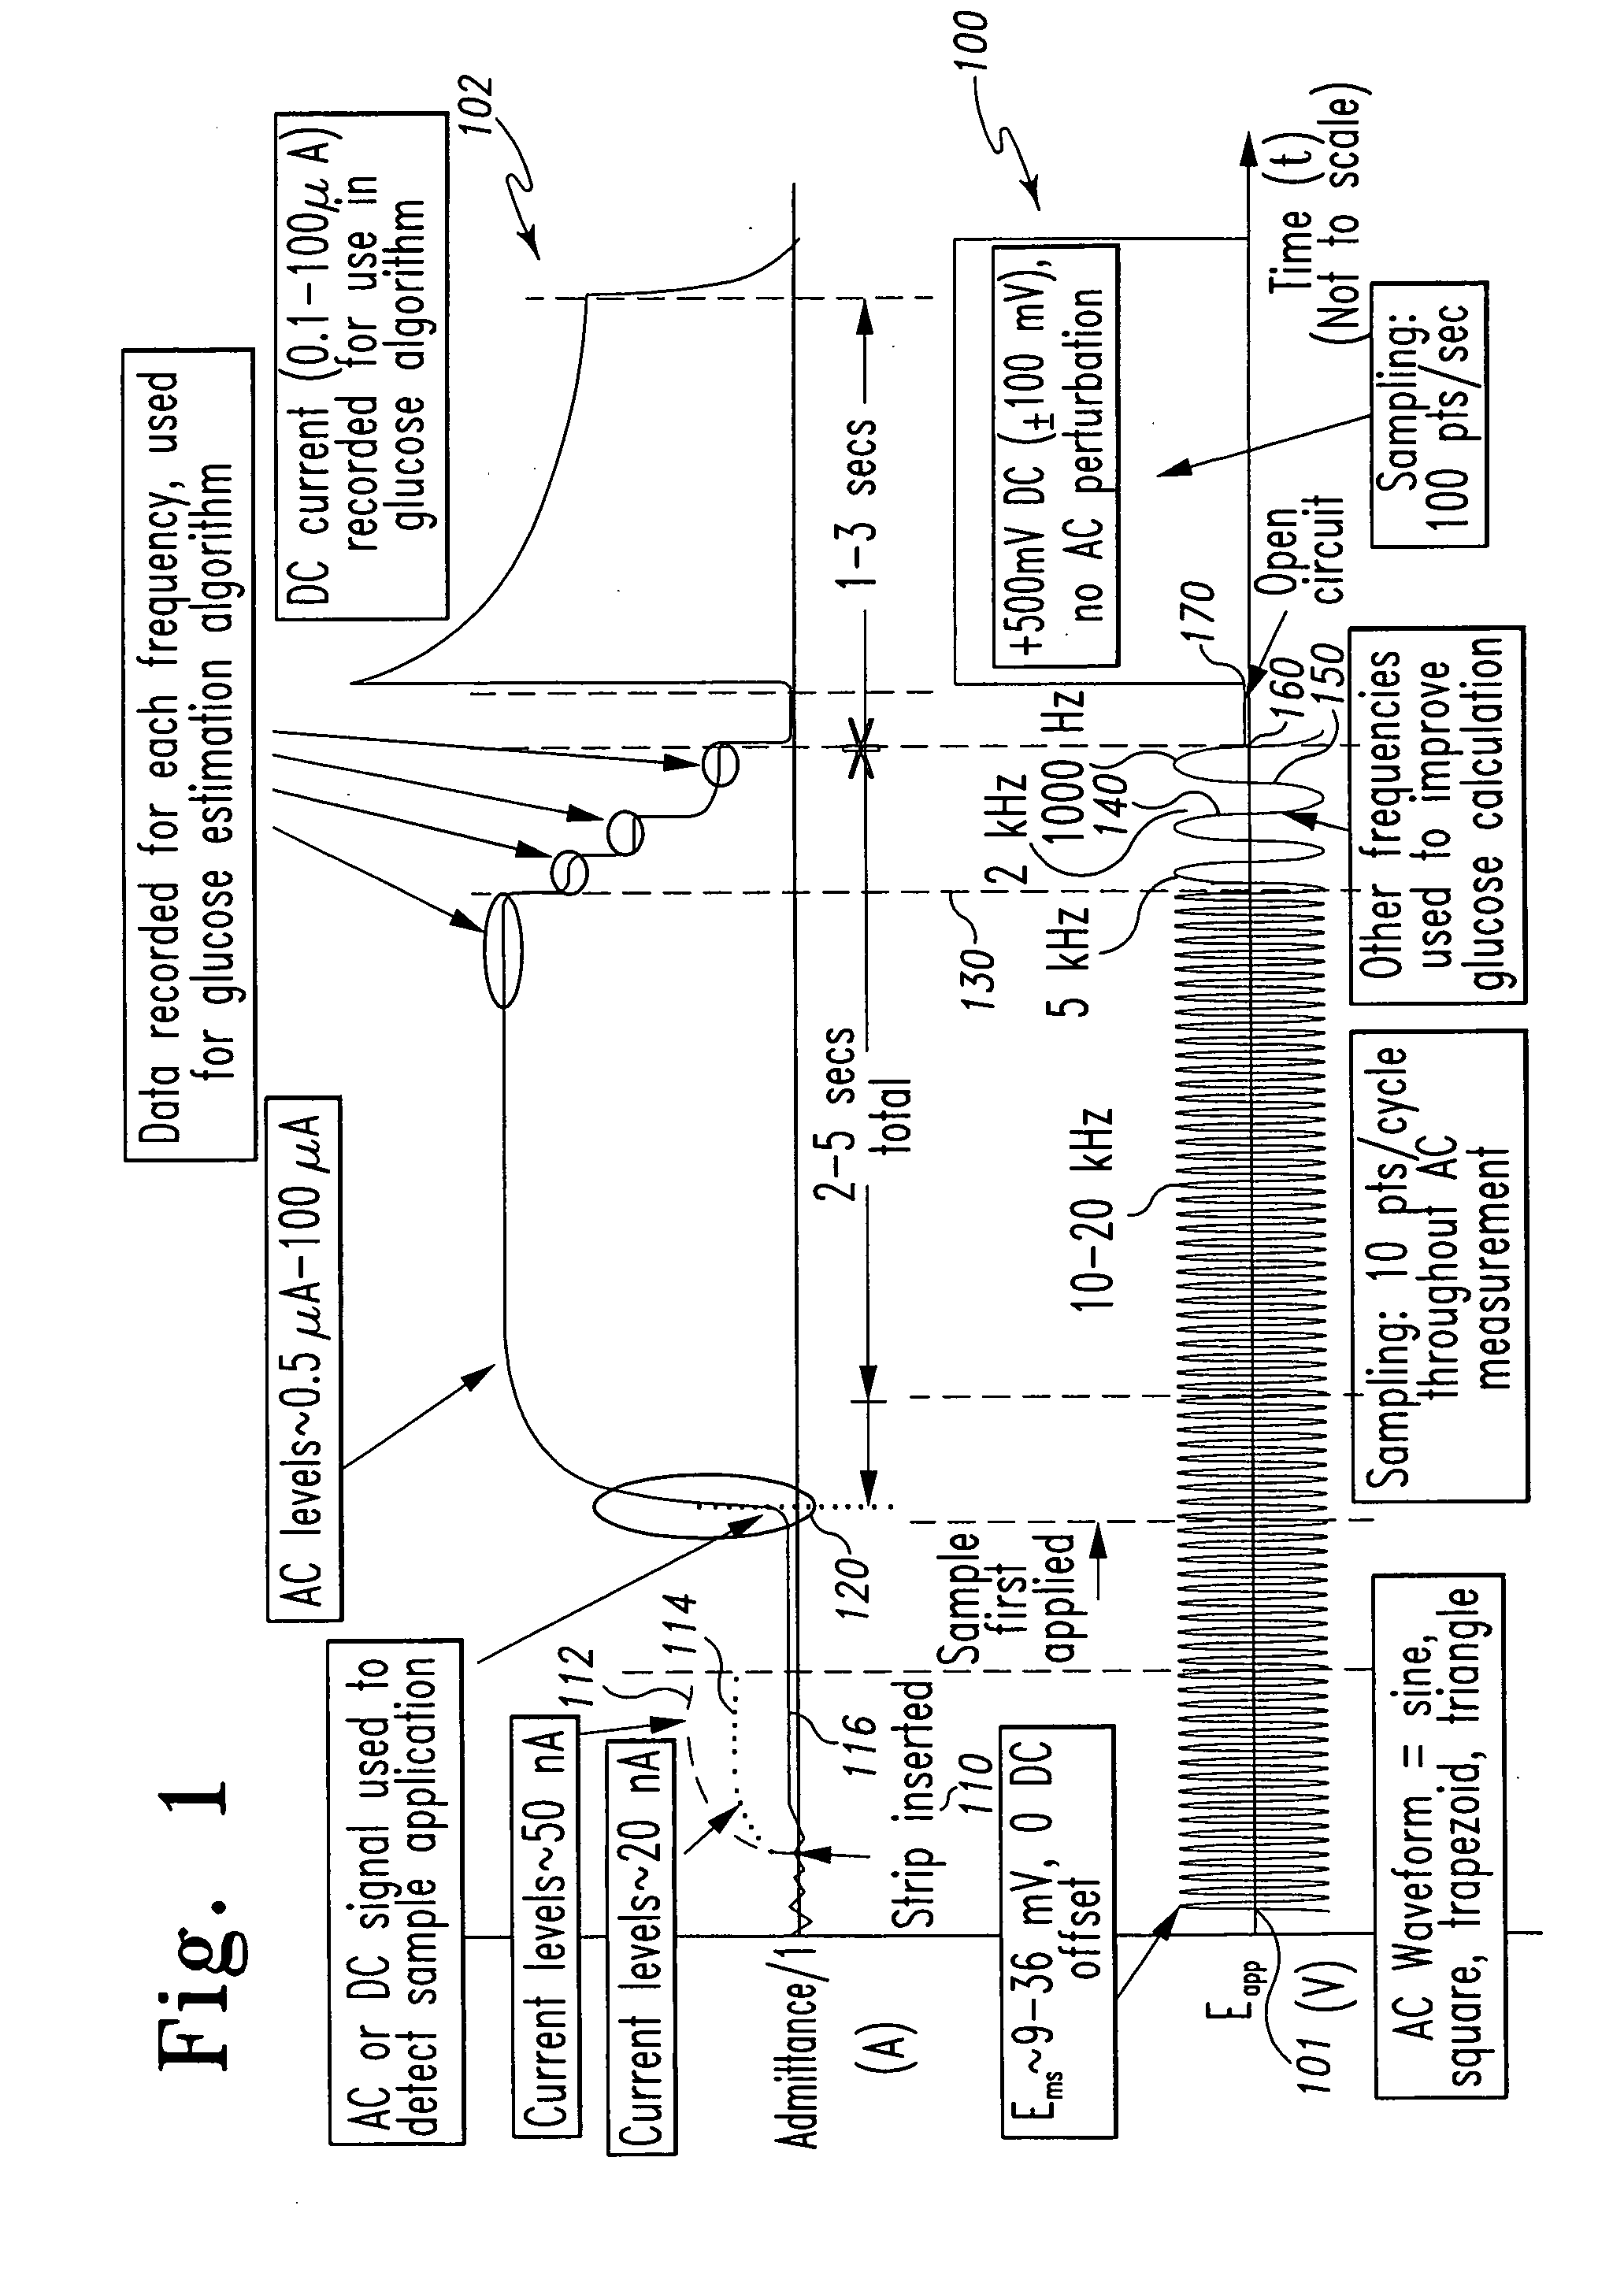 System and method for determining a temperature during analyte measurement